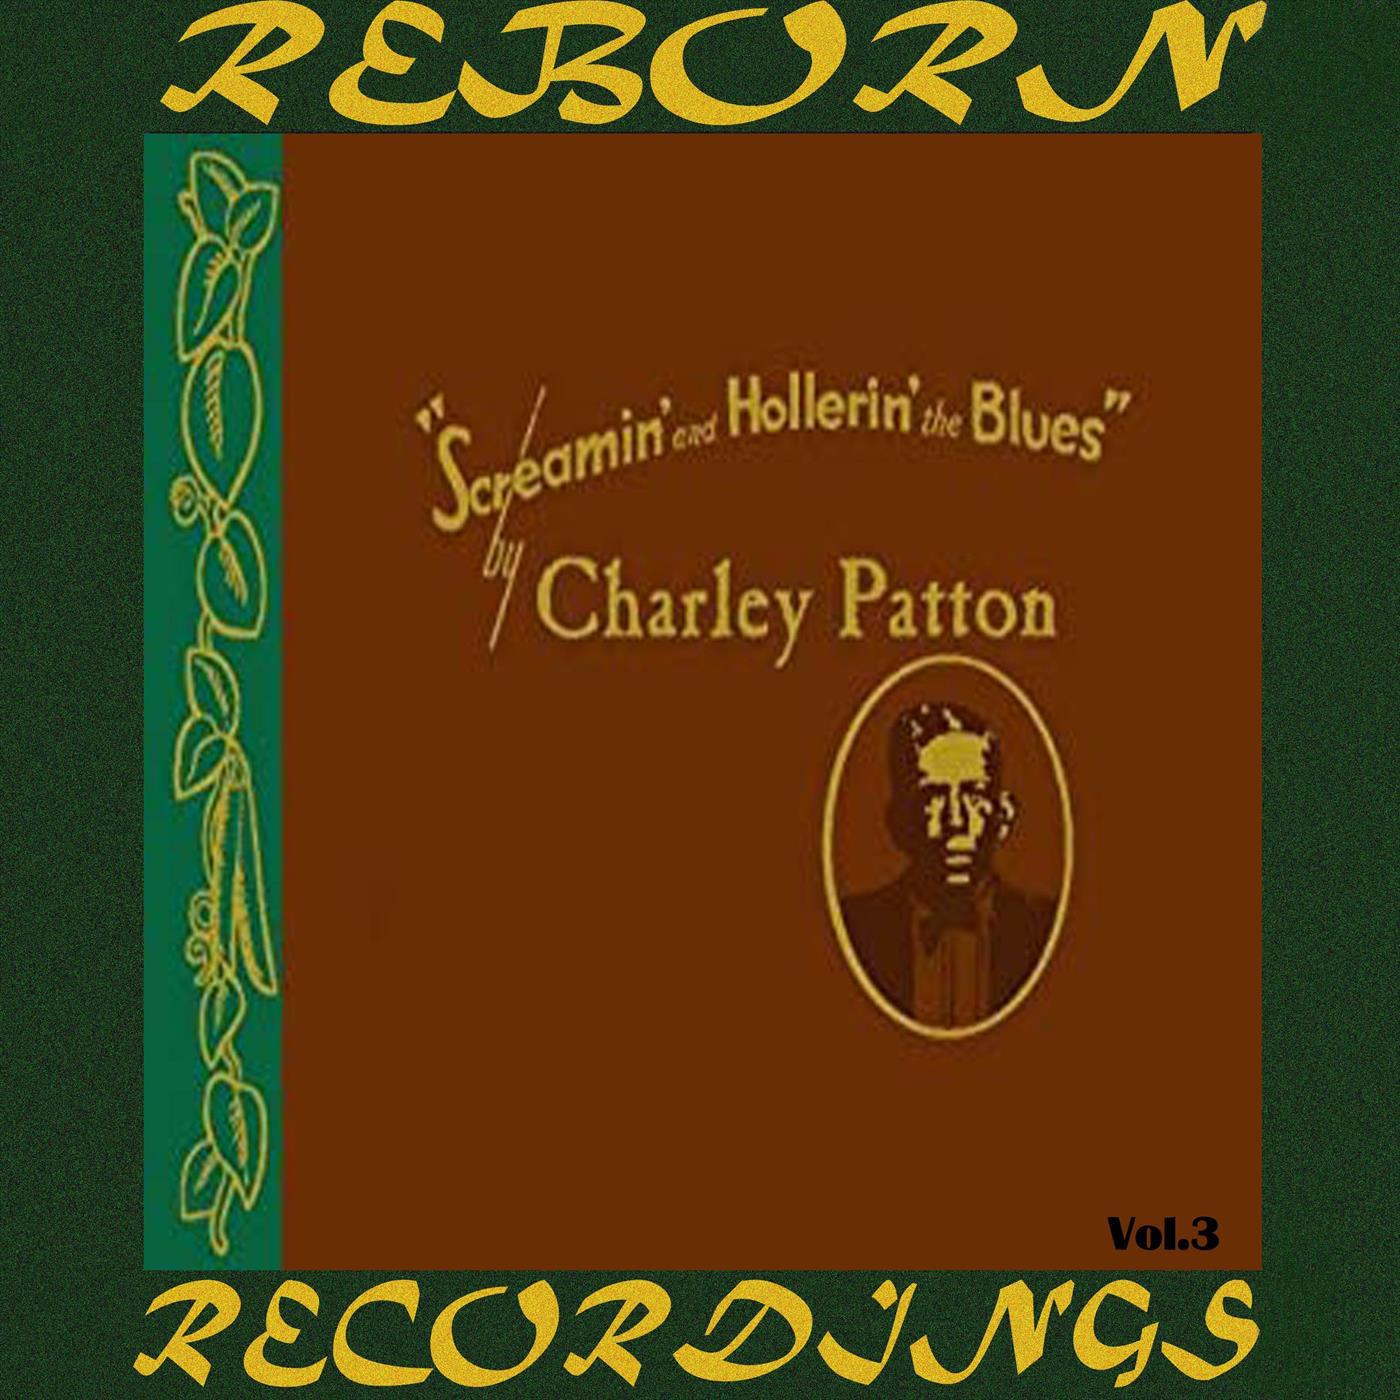 Screamin' and Hollerin' the Blues The Worlds of Charley Patton, Vol.3 (HD Remastered)